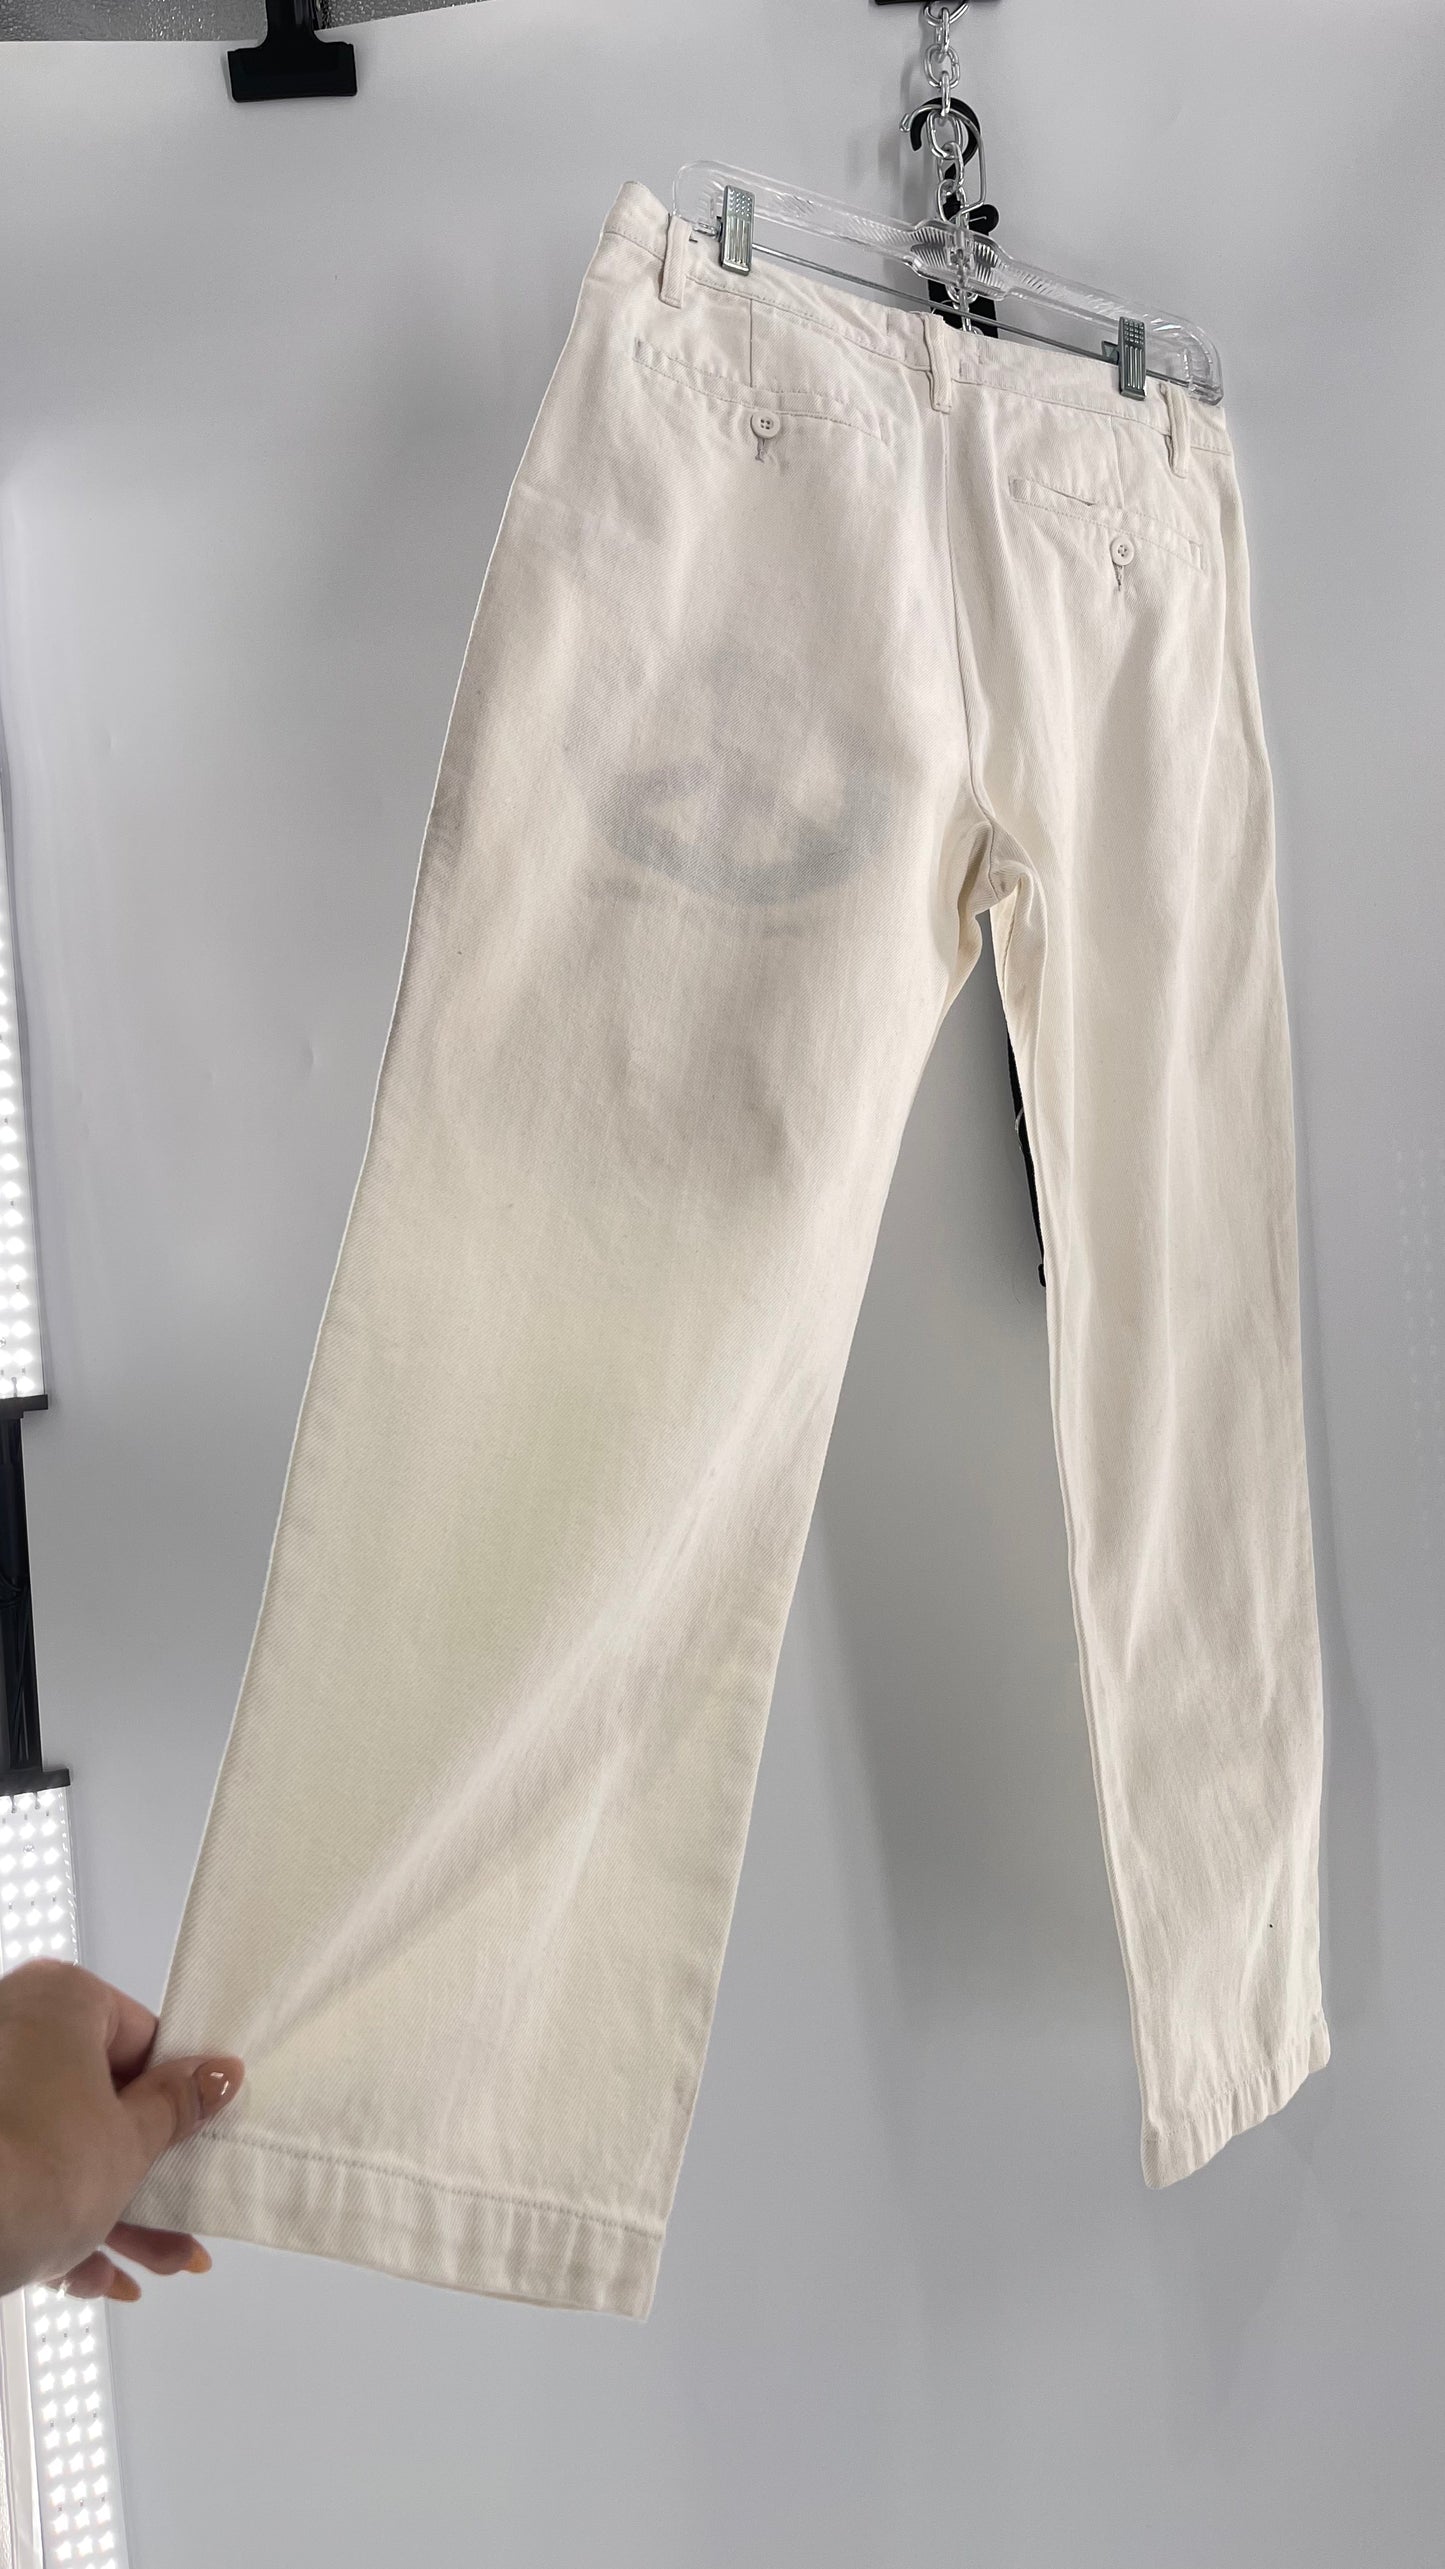 Urban Outfitters White Carpenter Pant with Globe Peace Sign Graphic (32)